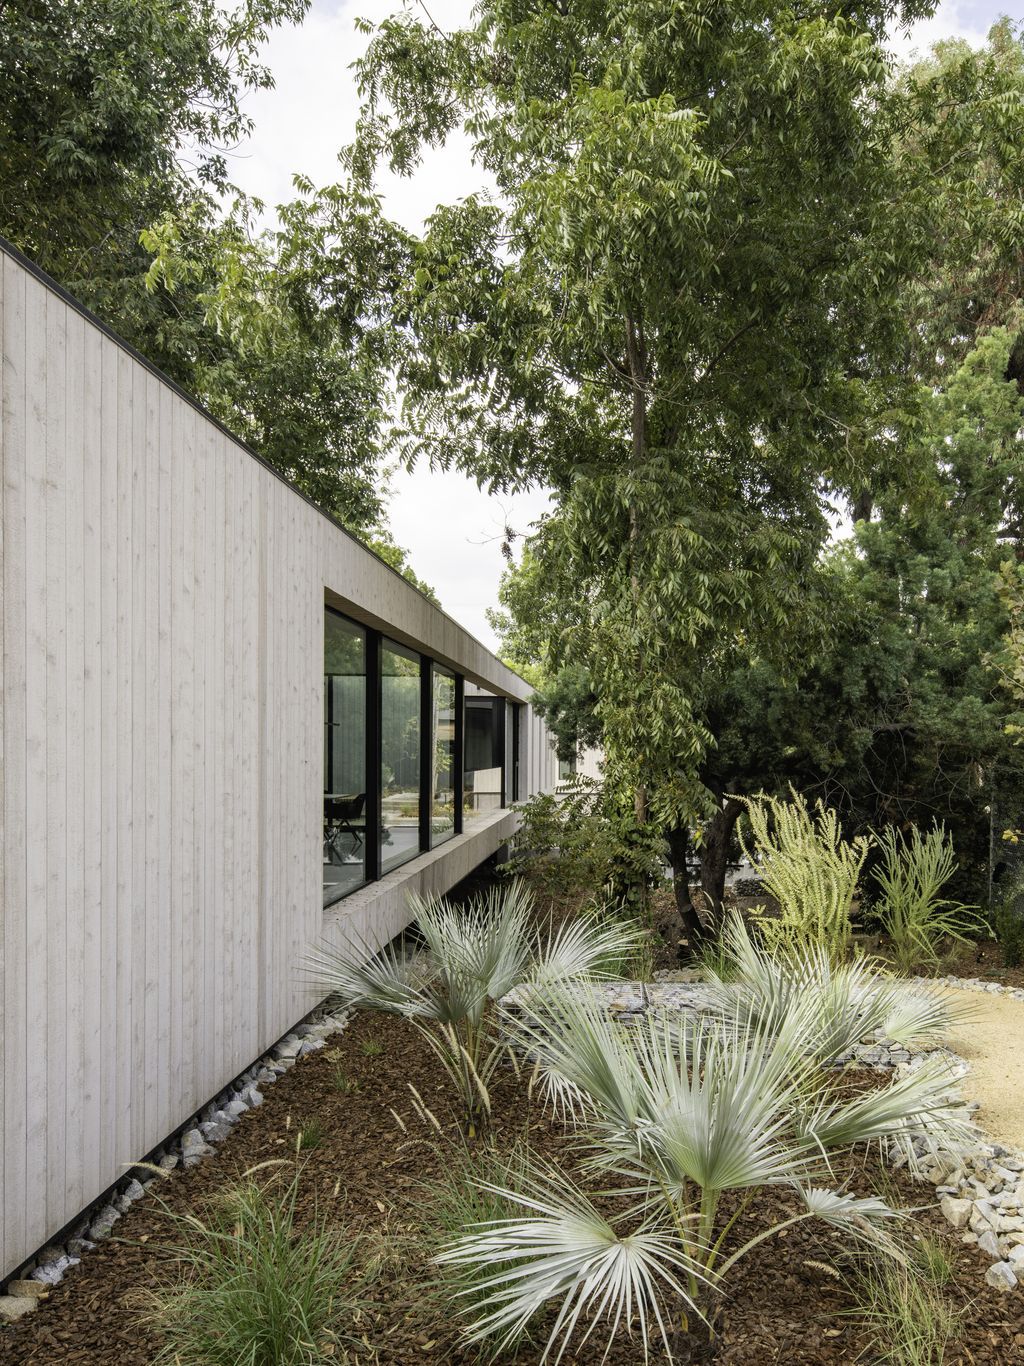 Bridge-House-Nestled-in-Nature-in-Los-Angeles-by-Dan-Brunn-Architecture-19